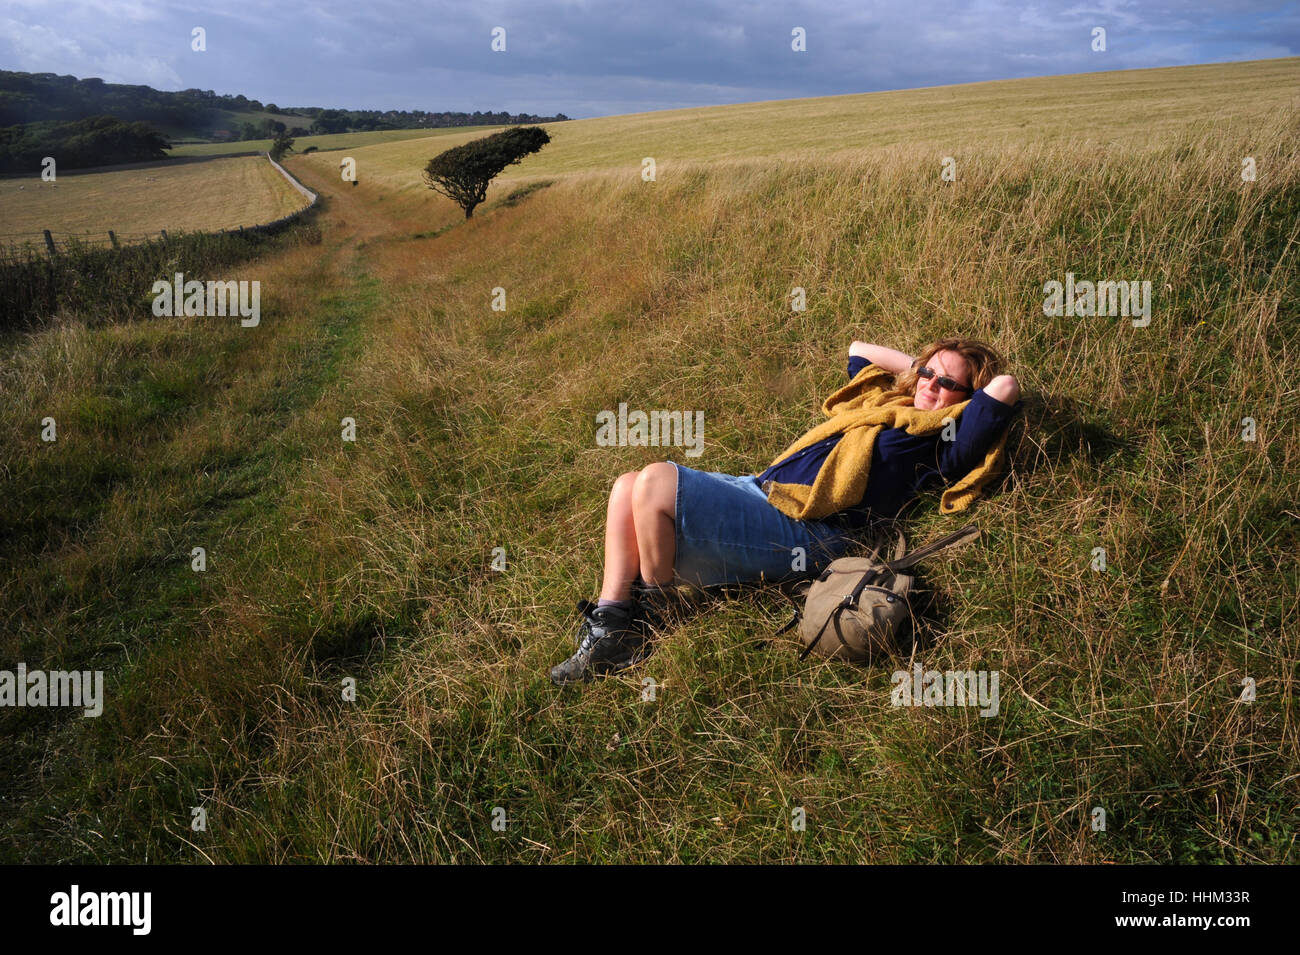 Soaking up the sun during a country walk Stock Photo